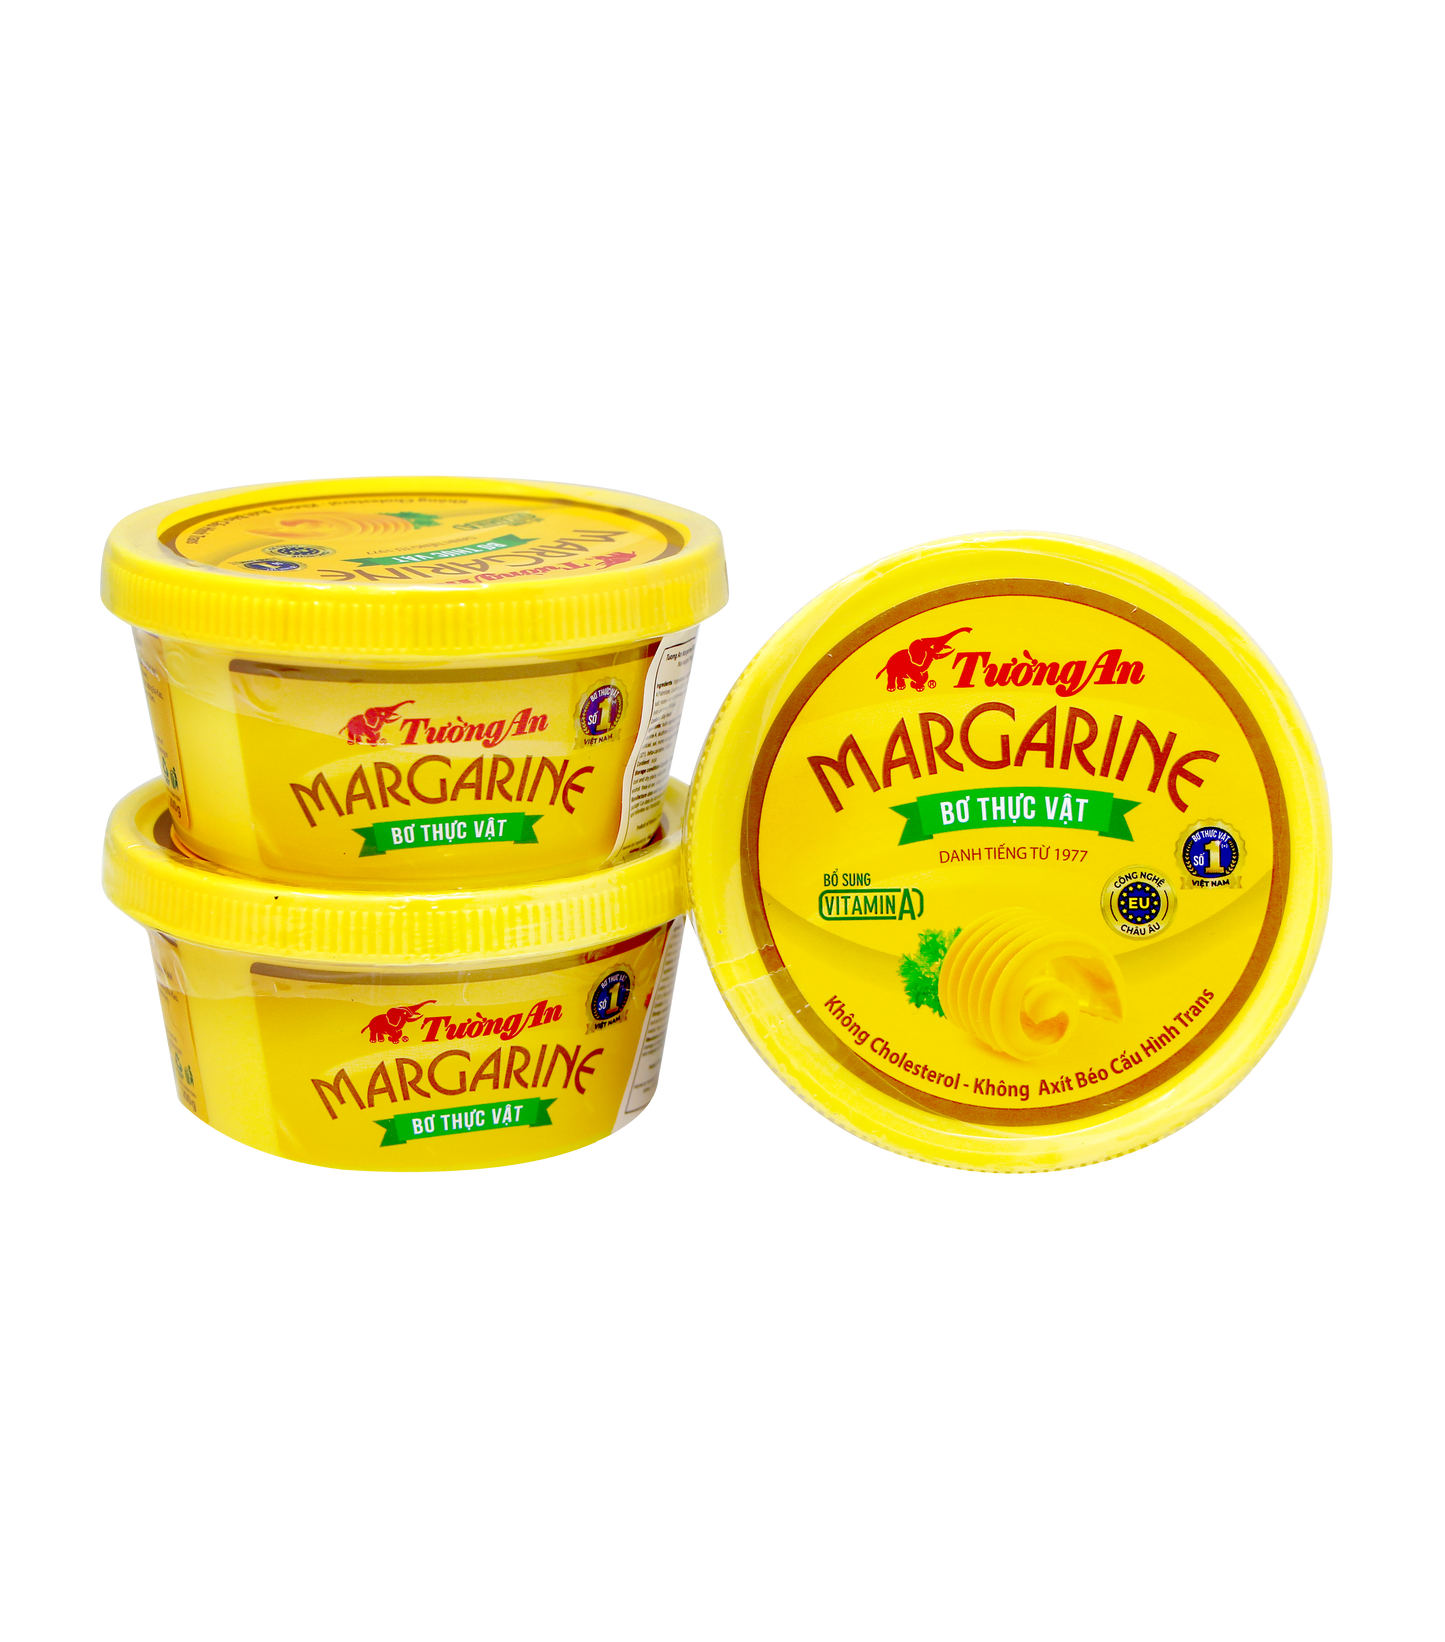 Tuong An Margarine (Box of 60)